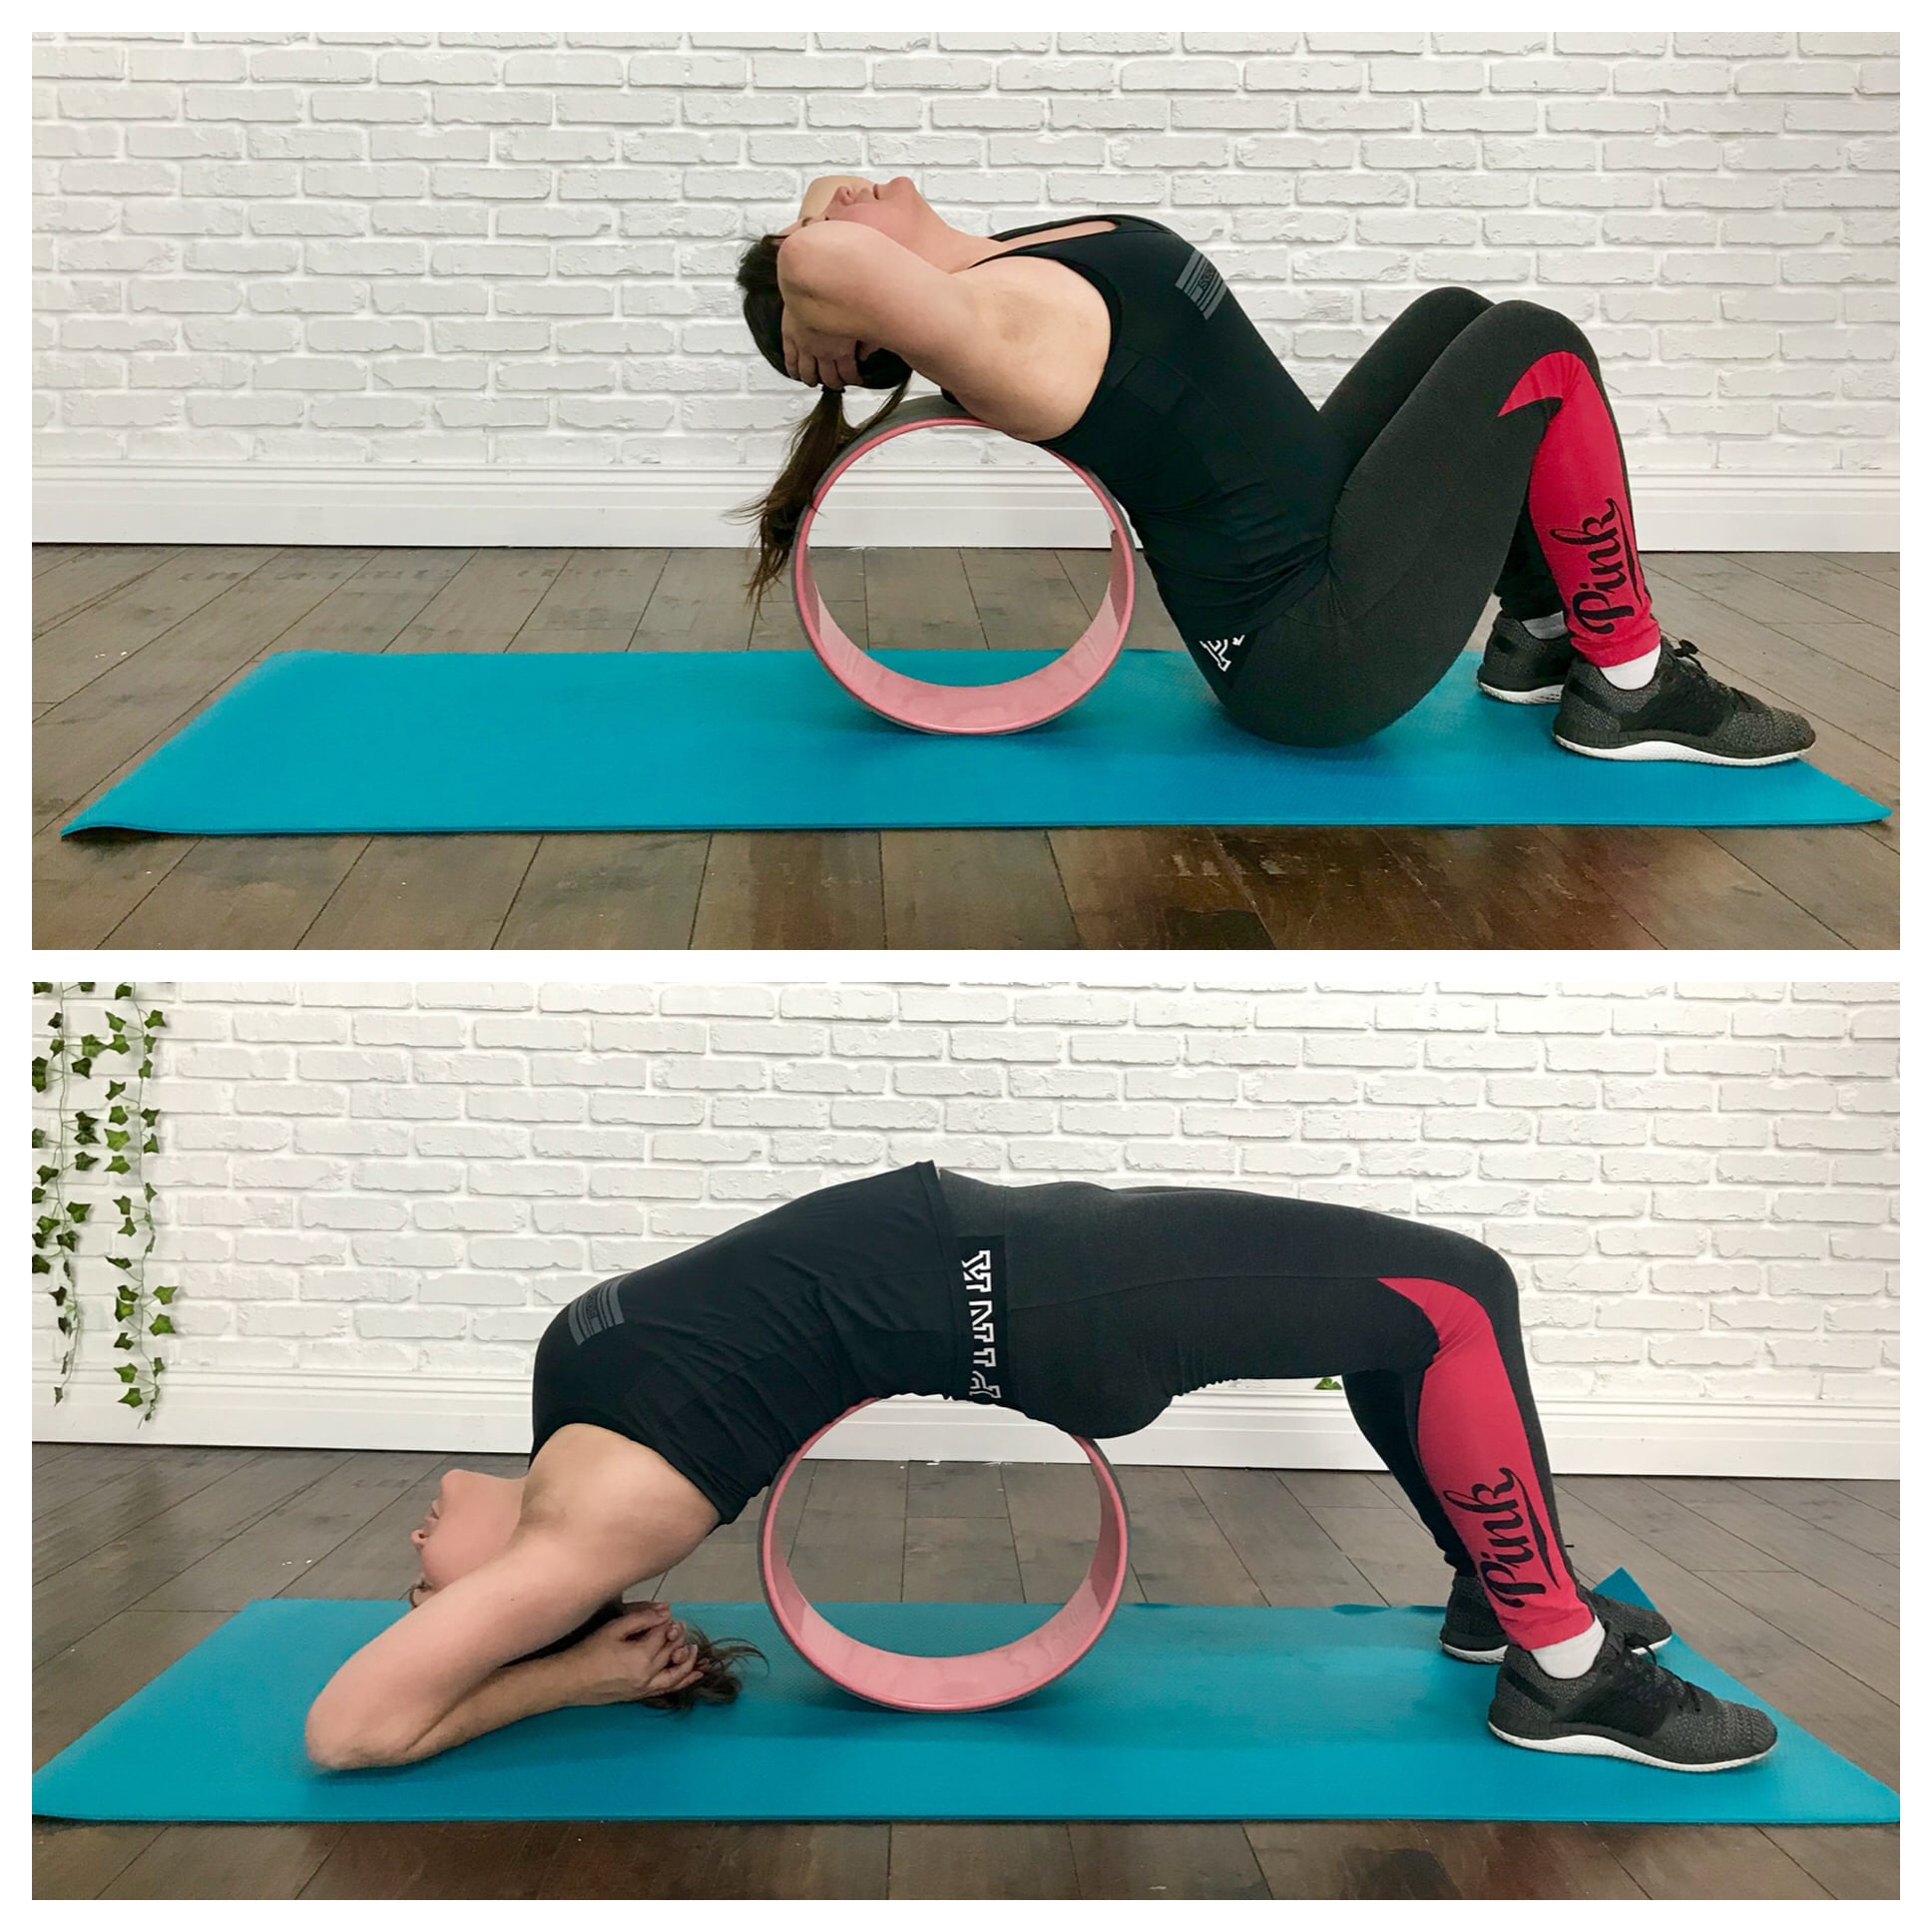 5 Best Yoga Poses to Try with a Yoga Wheel